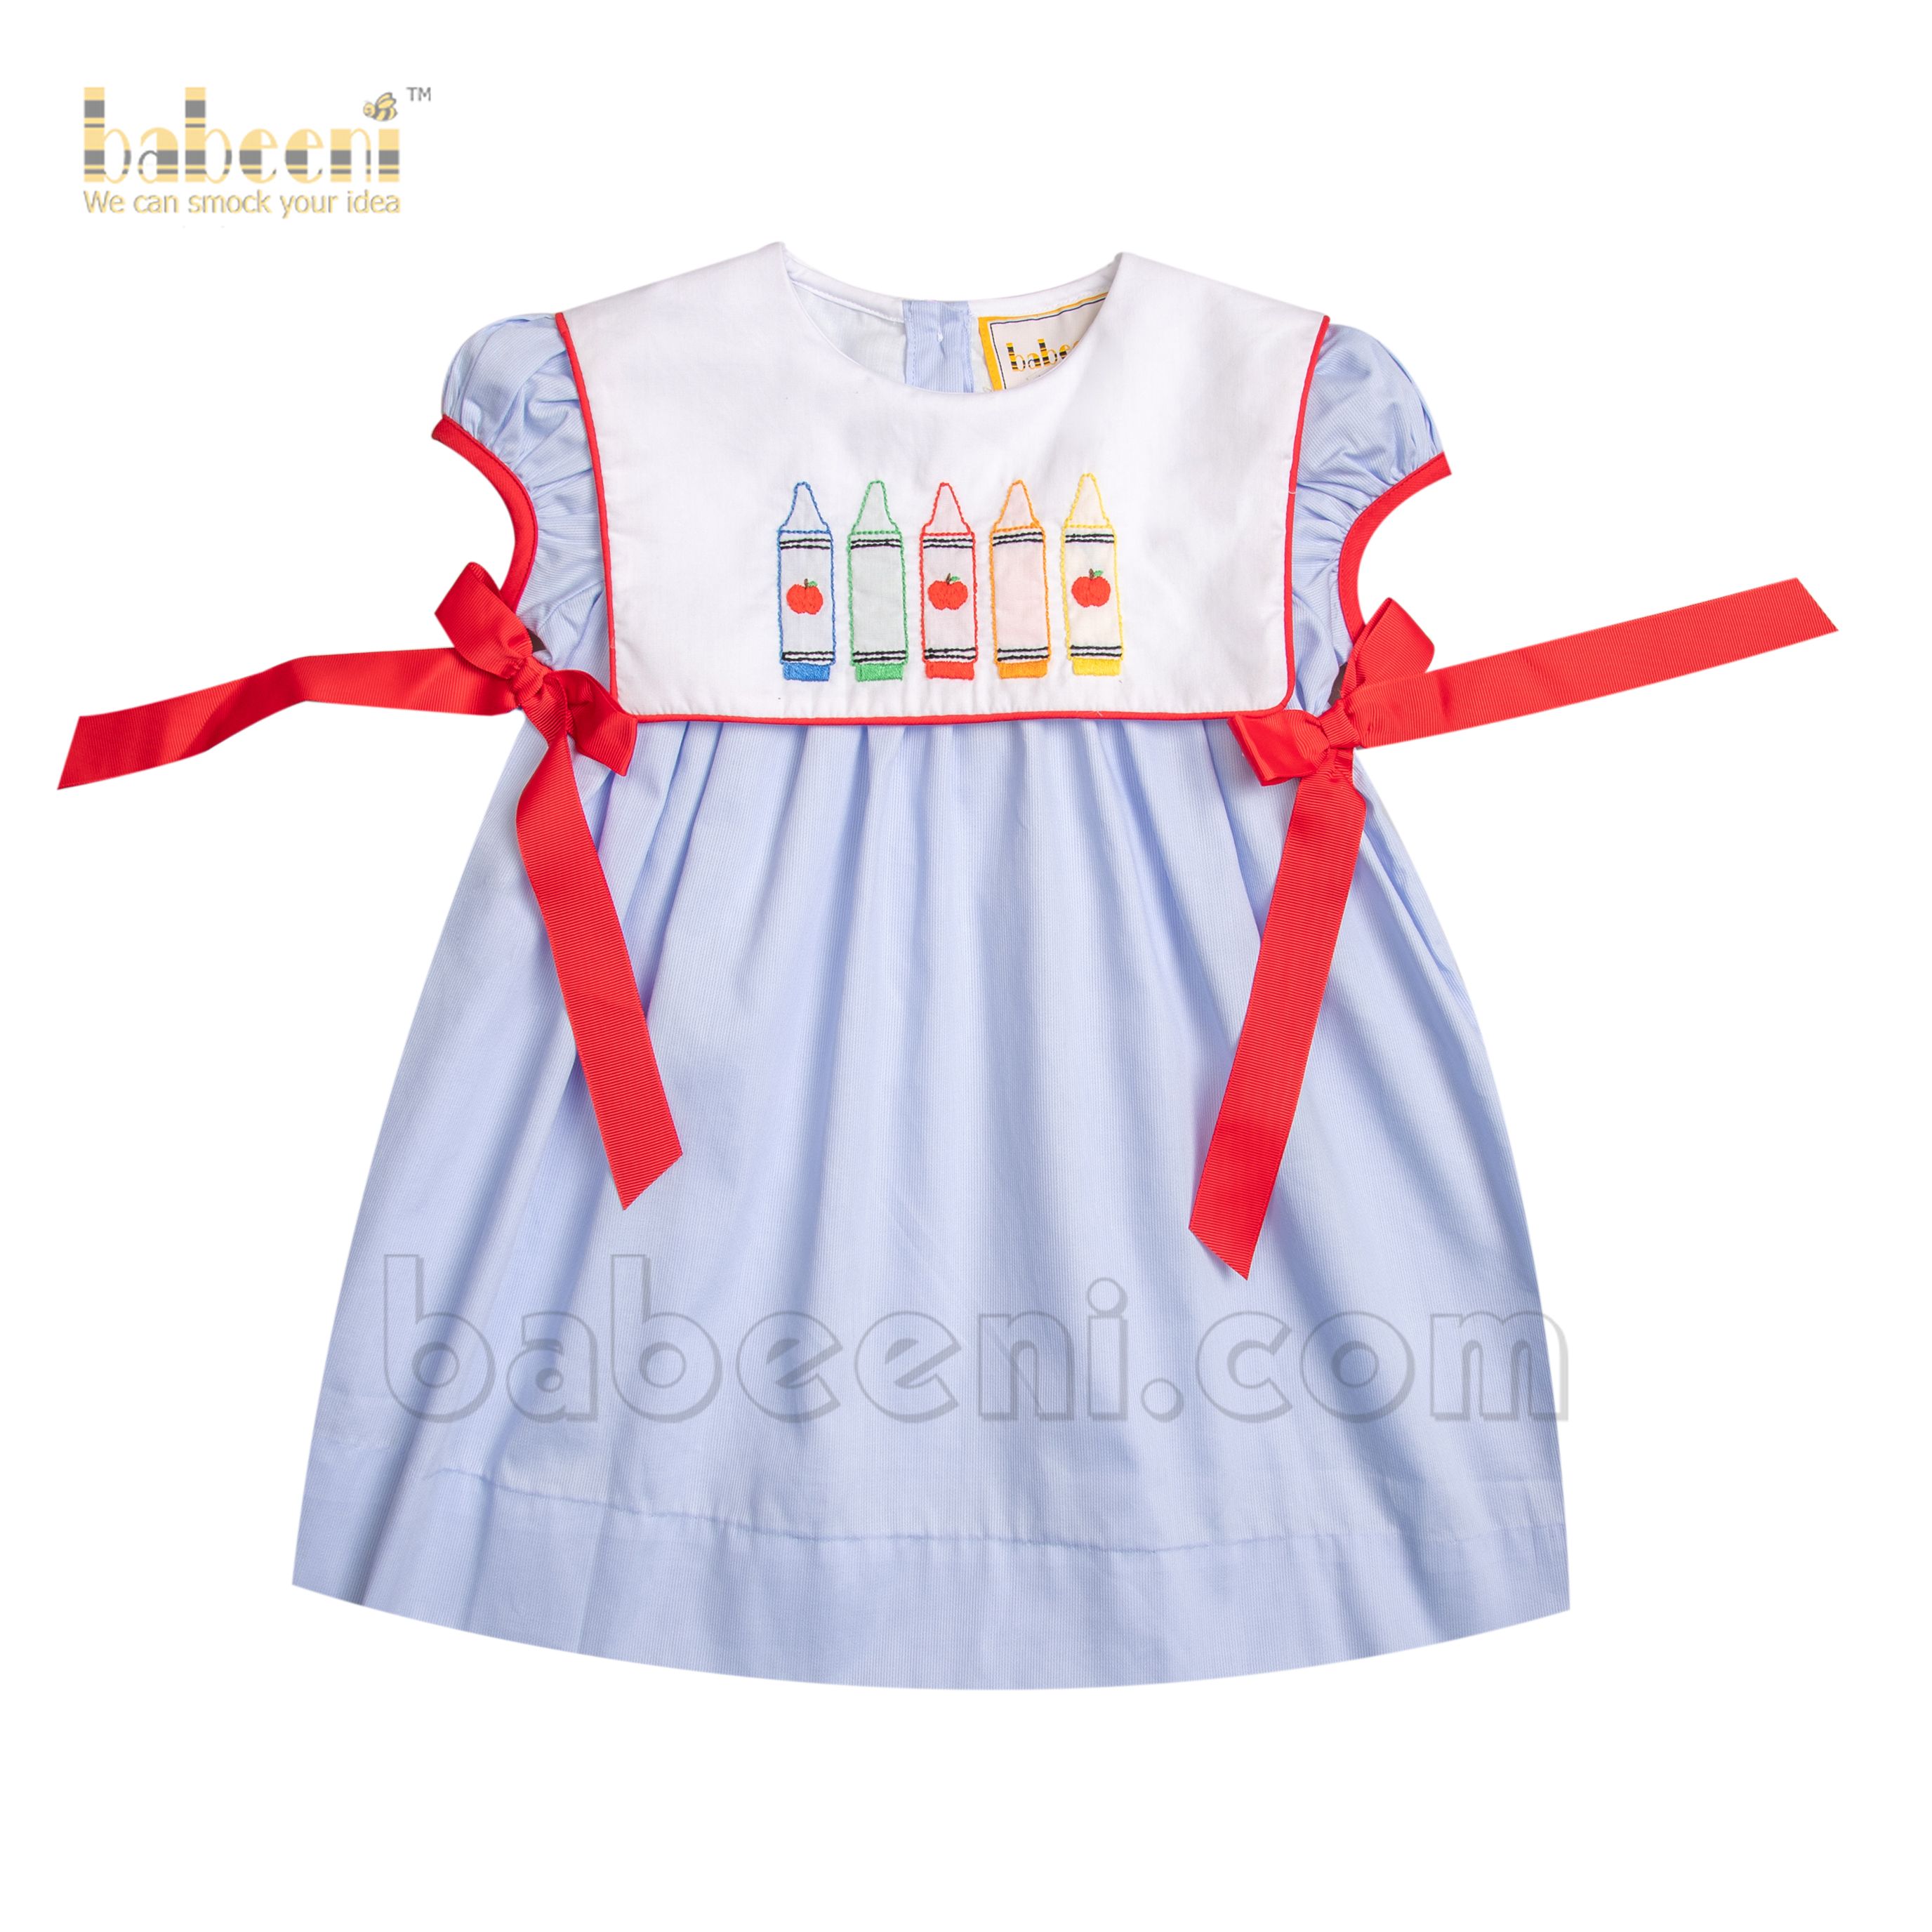 Crayons embroidery blue pique girl dress - DR 3092